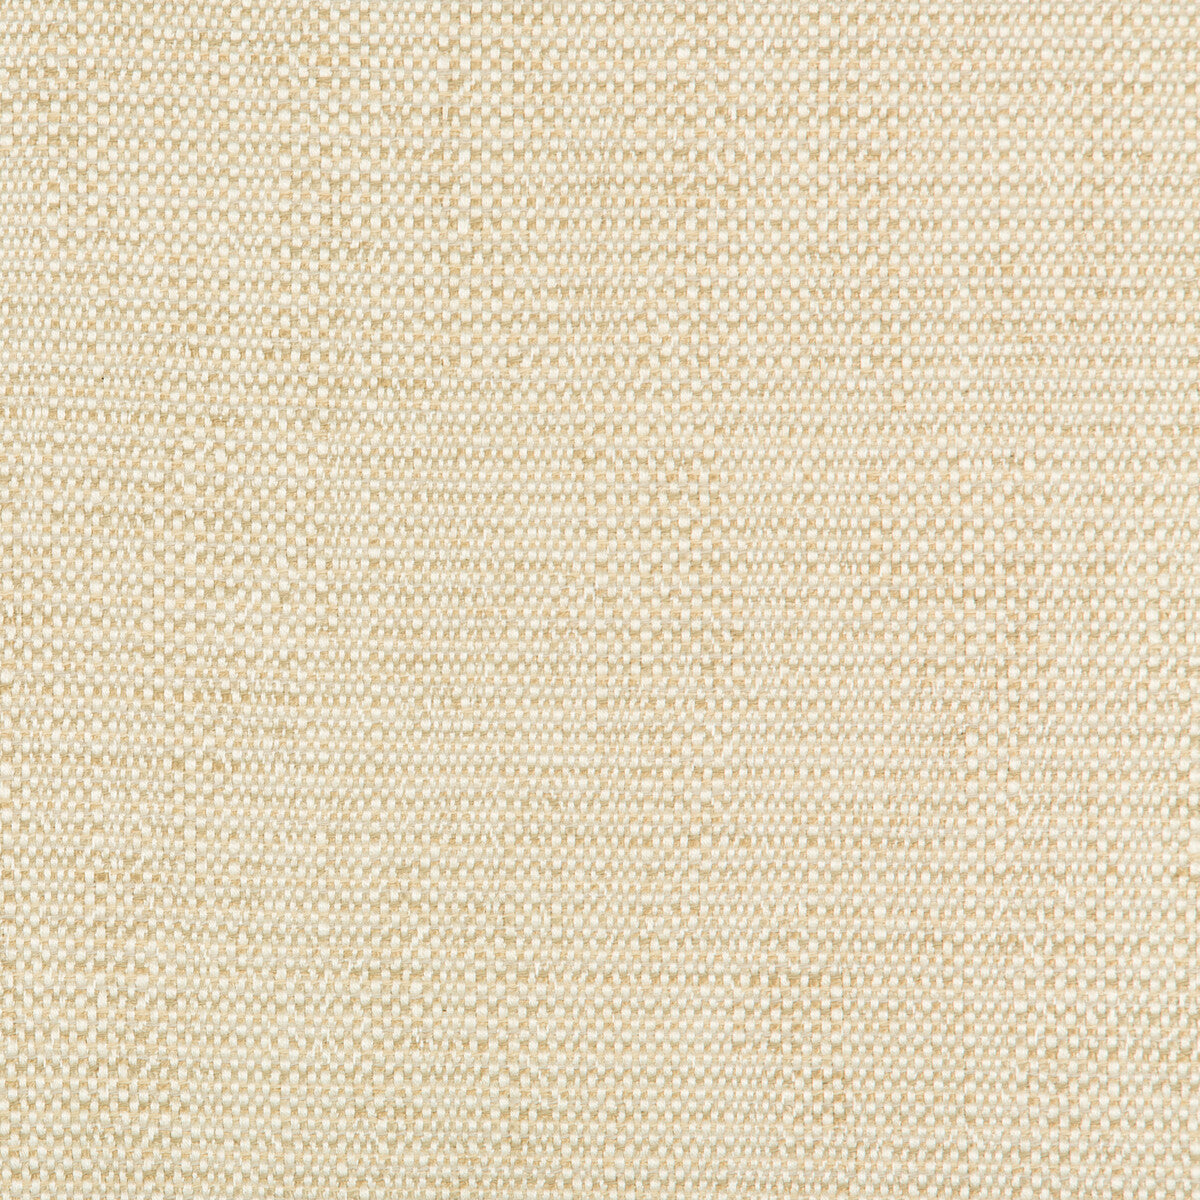 Kravet Design fabric in 35135-116 color - pattern 35135.116.0 - by Kravet Design in the Performance Crypton Home collection